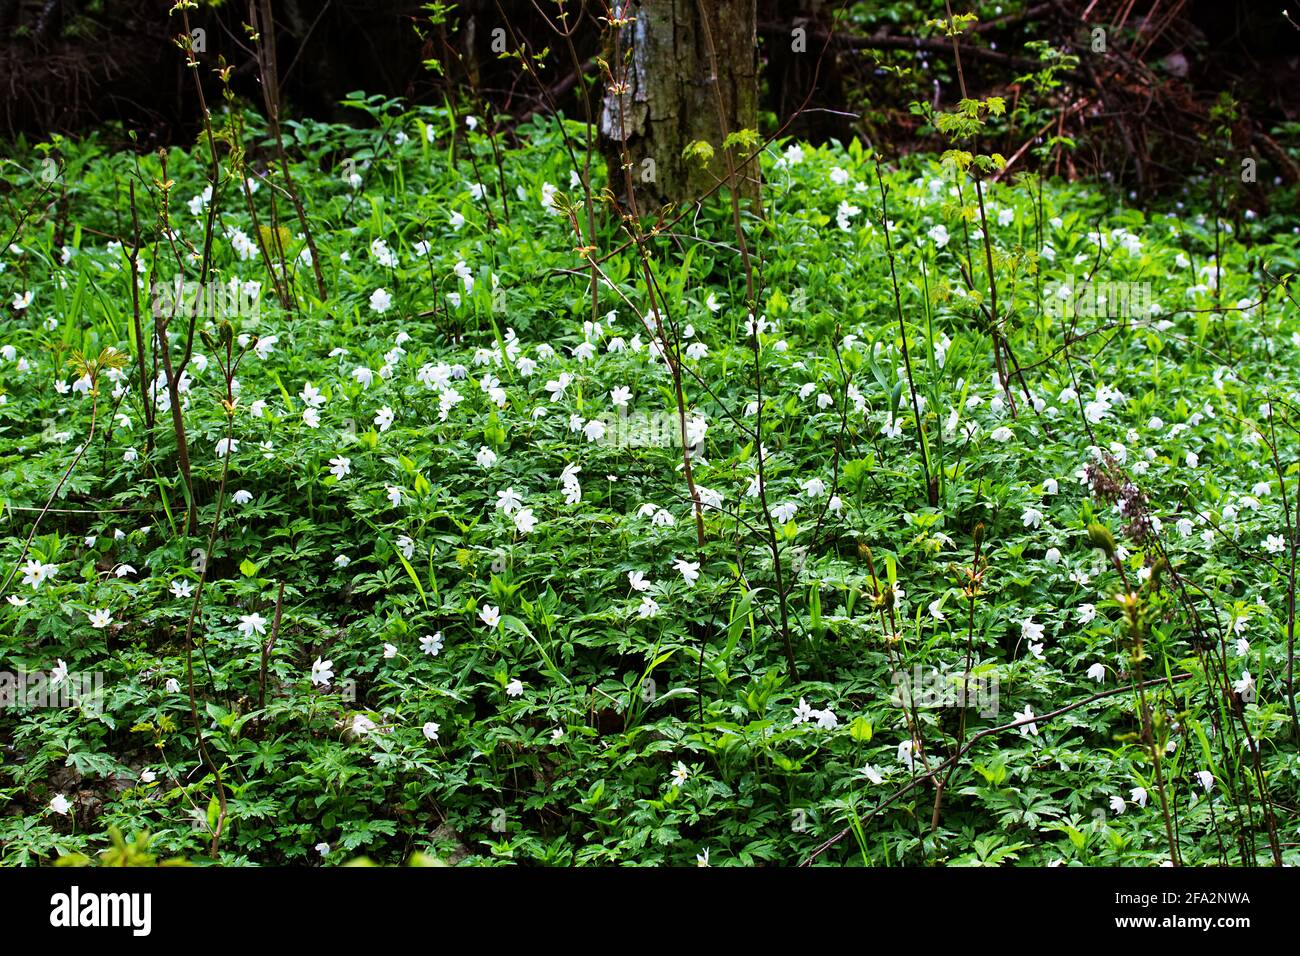 A lawn of anemone flowers in the spring forest Stock Photo